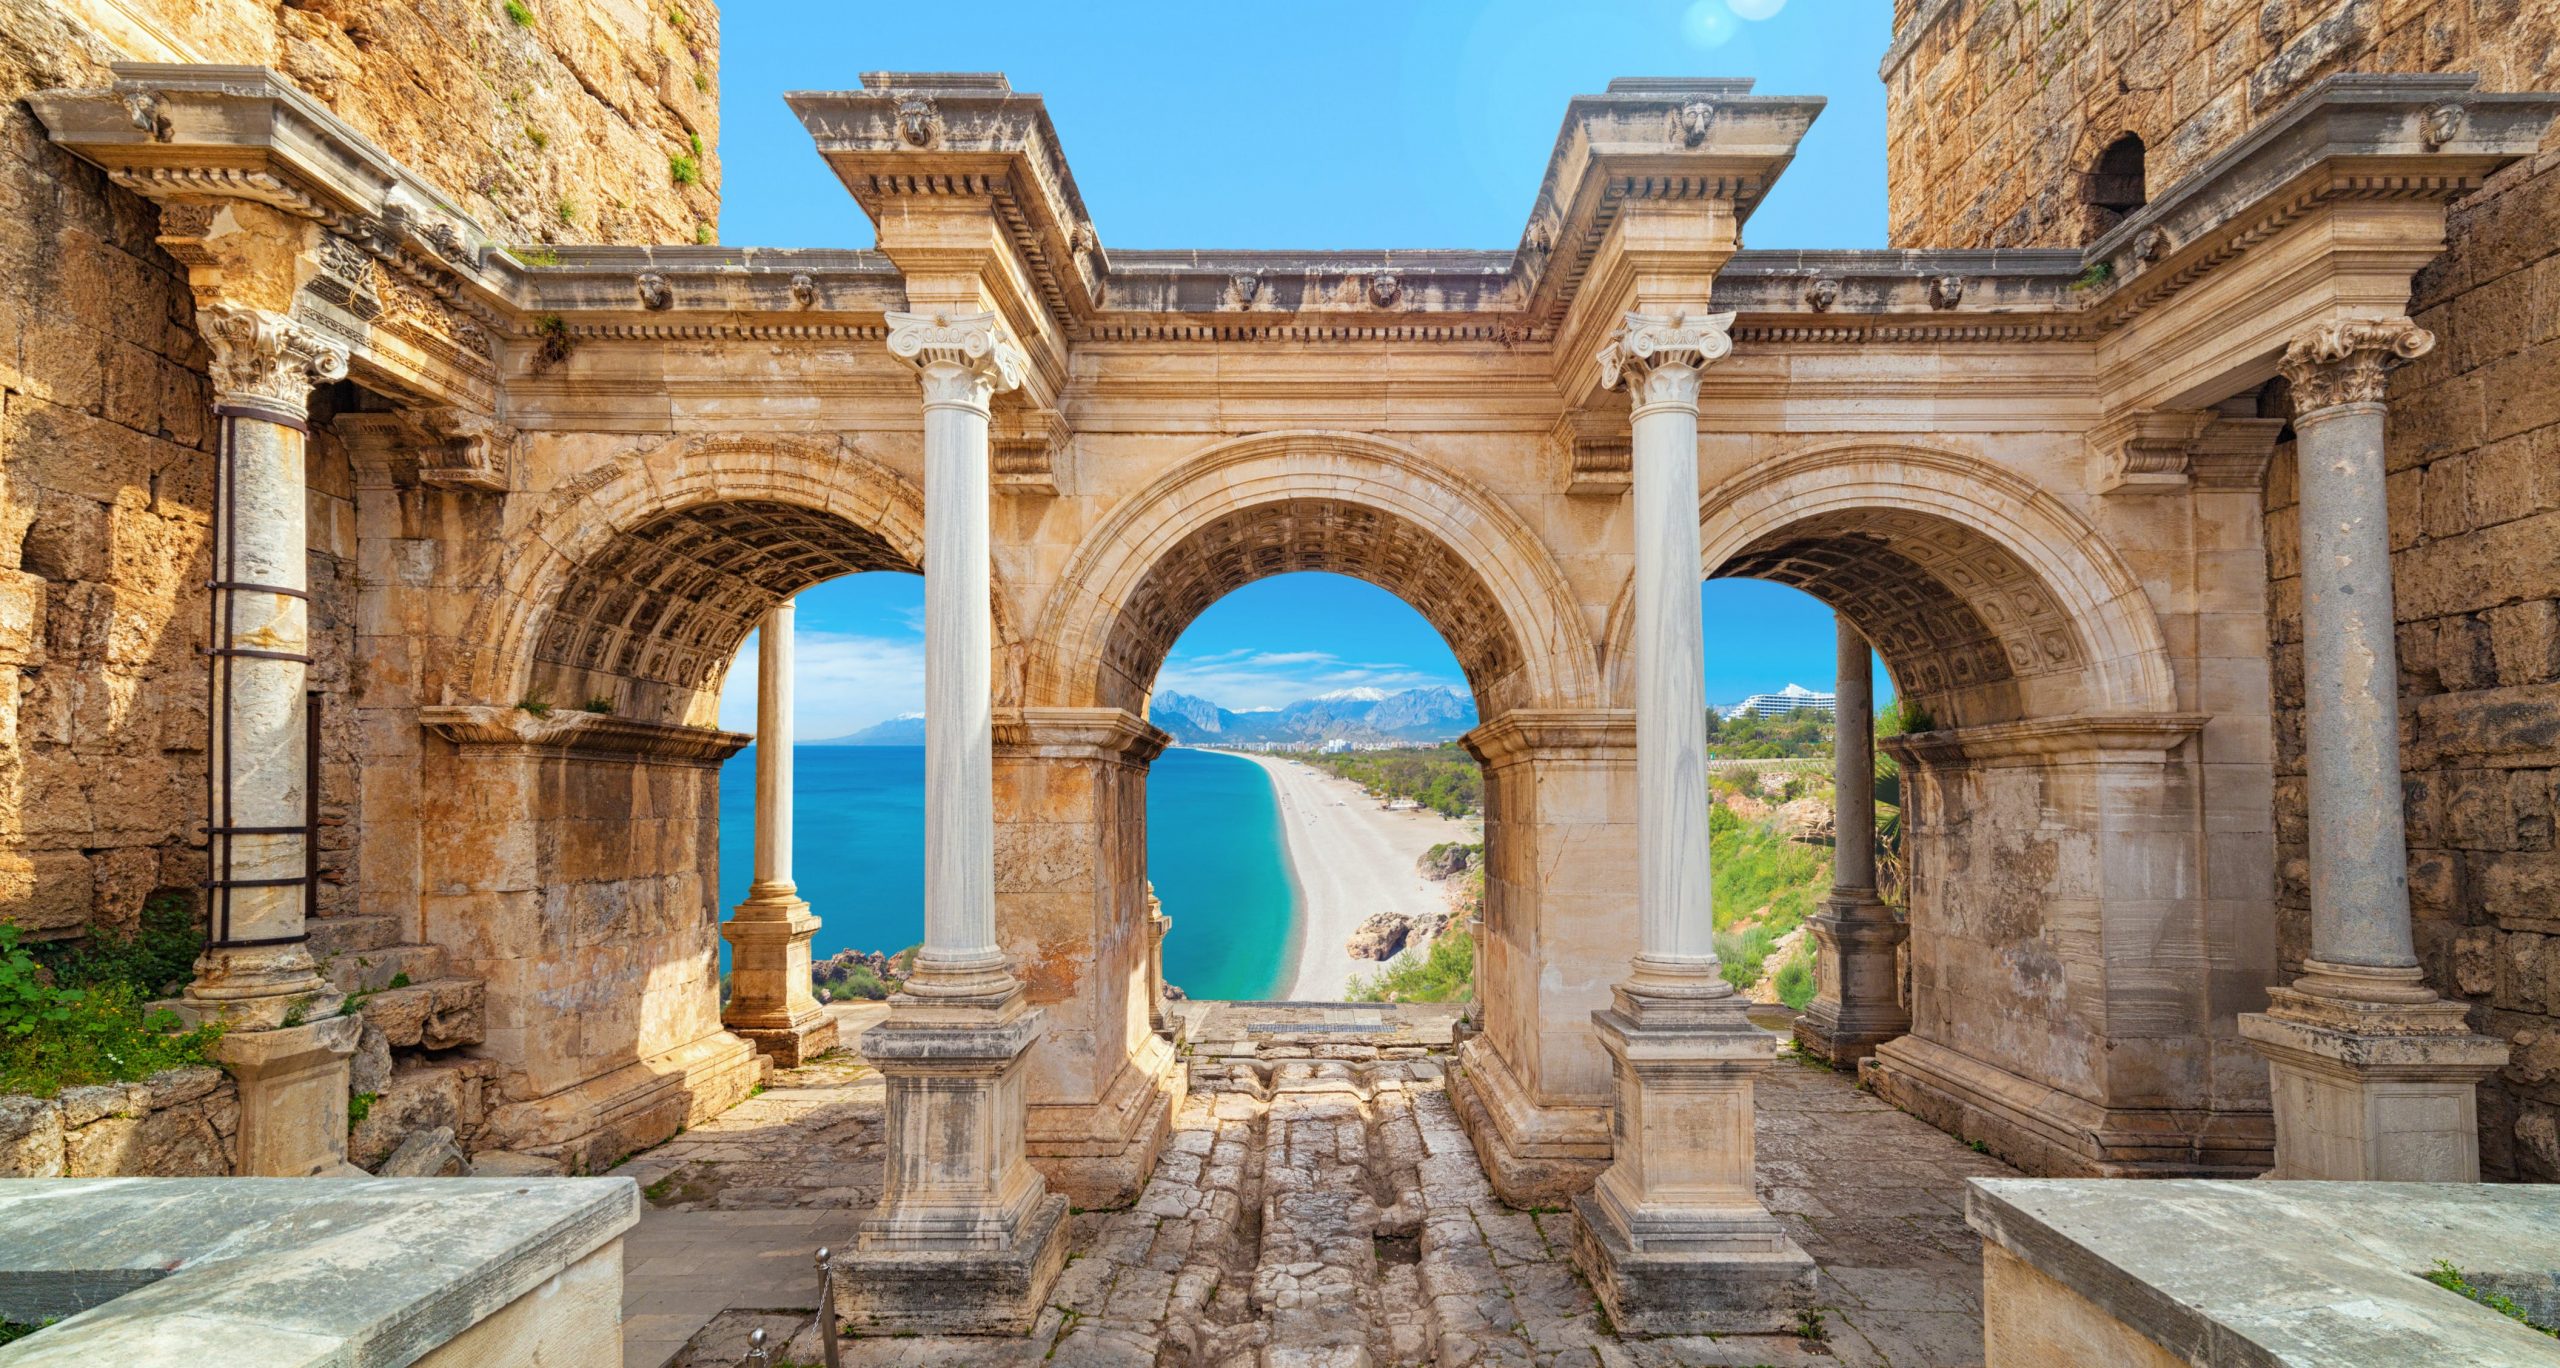 11 Most Amazing Things To Do In Antalya That Will Help You in Travel